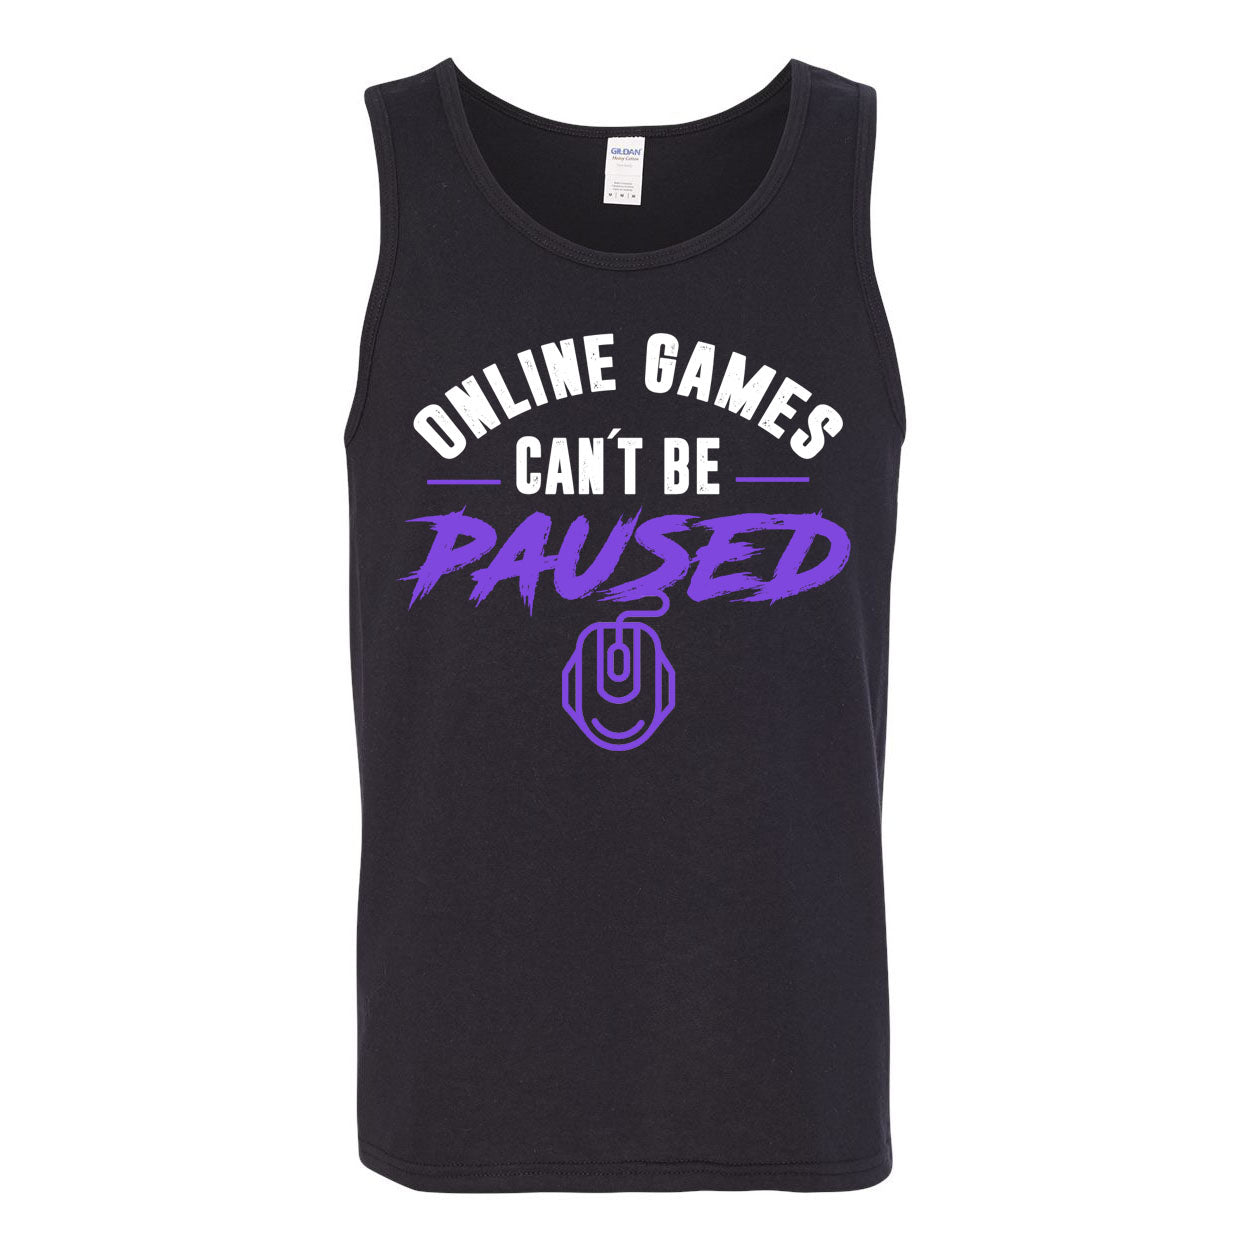 CANT BE PAUSED TANK TOP T-SHIRT 